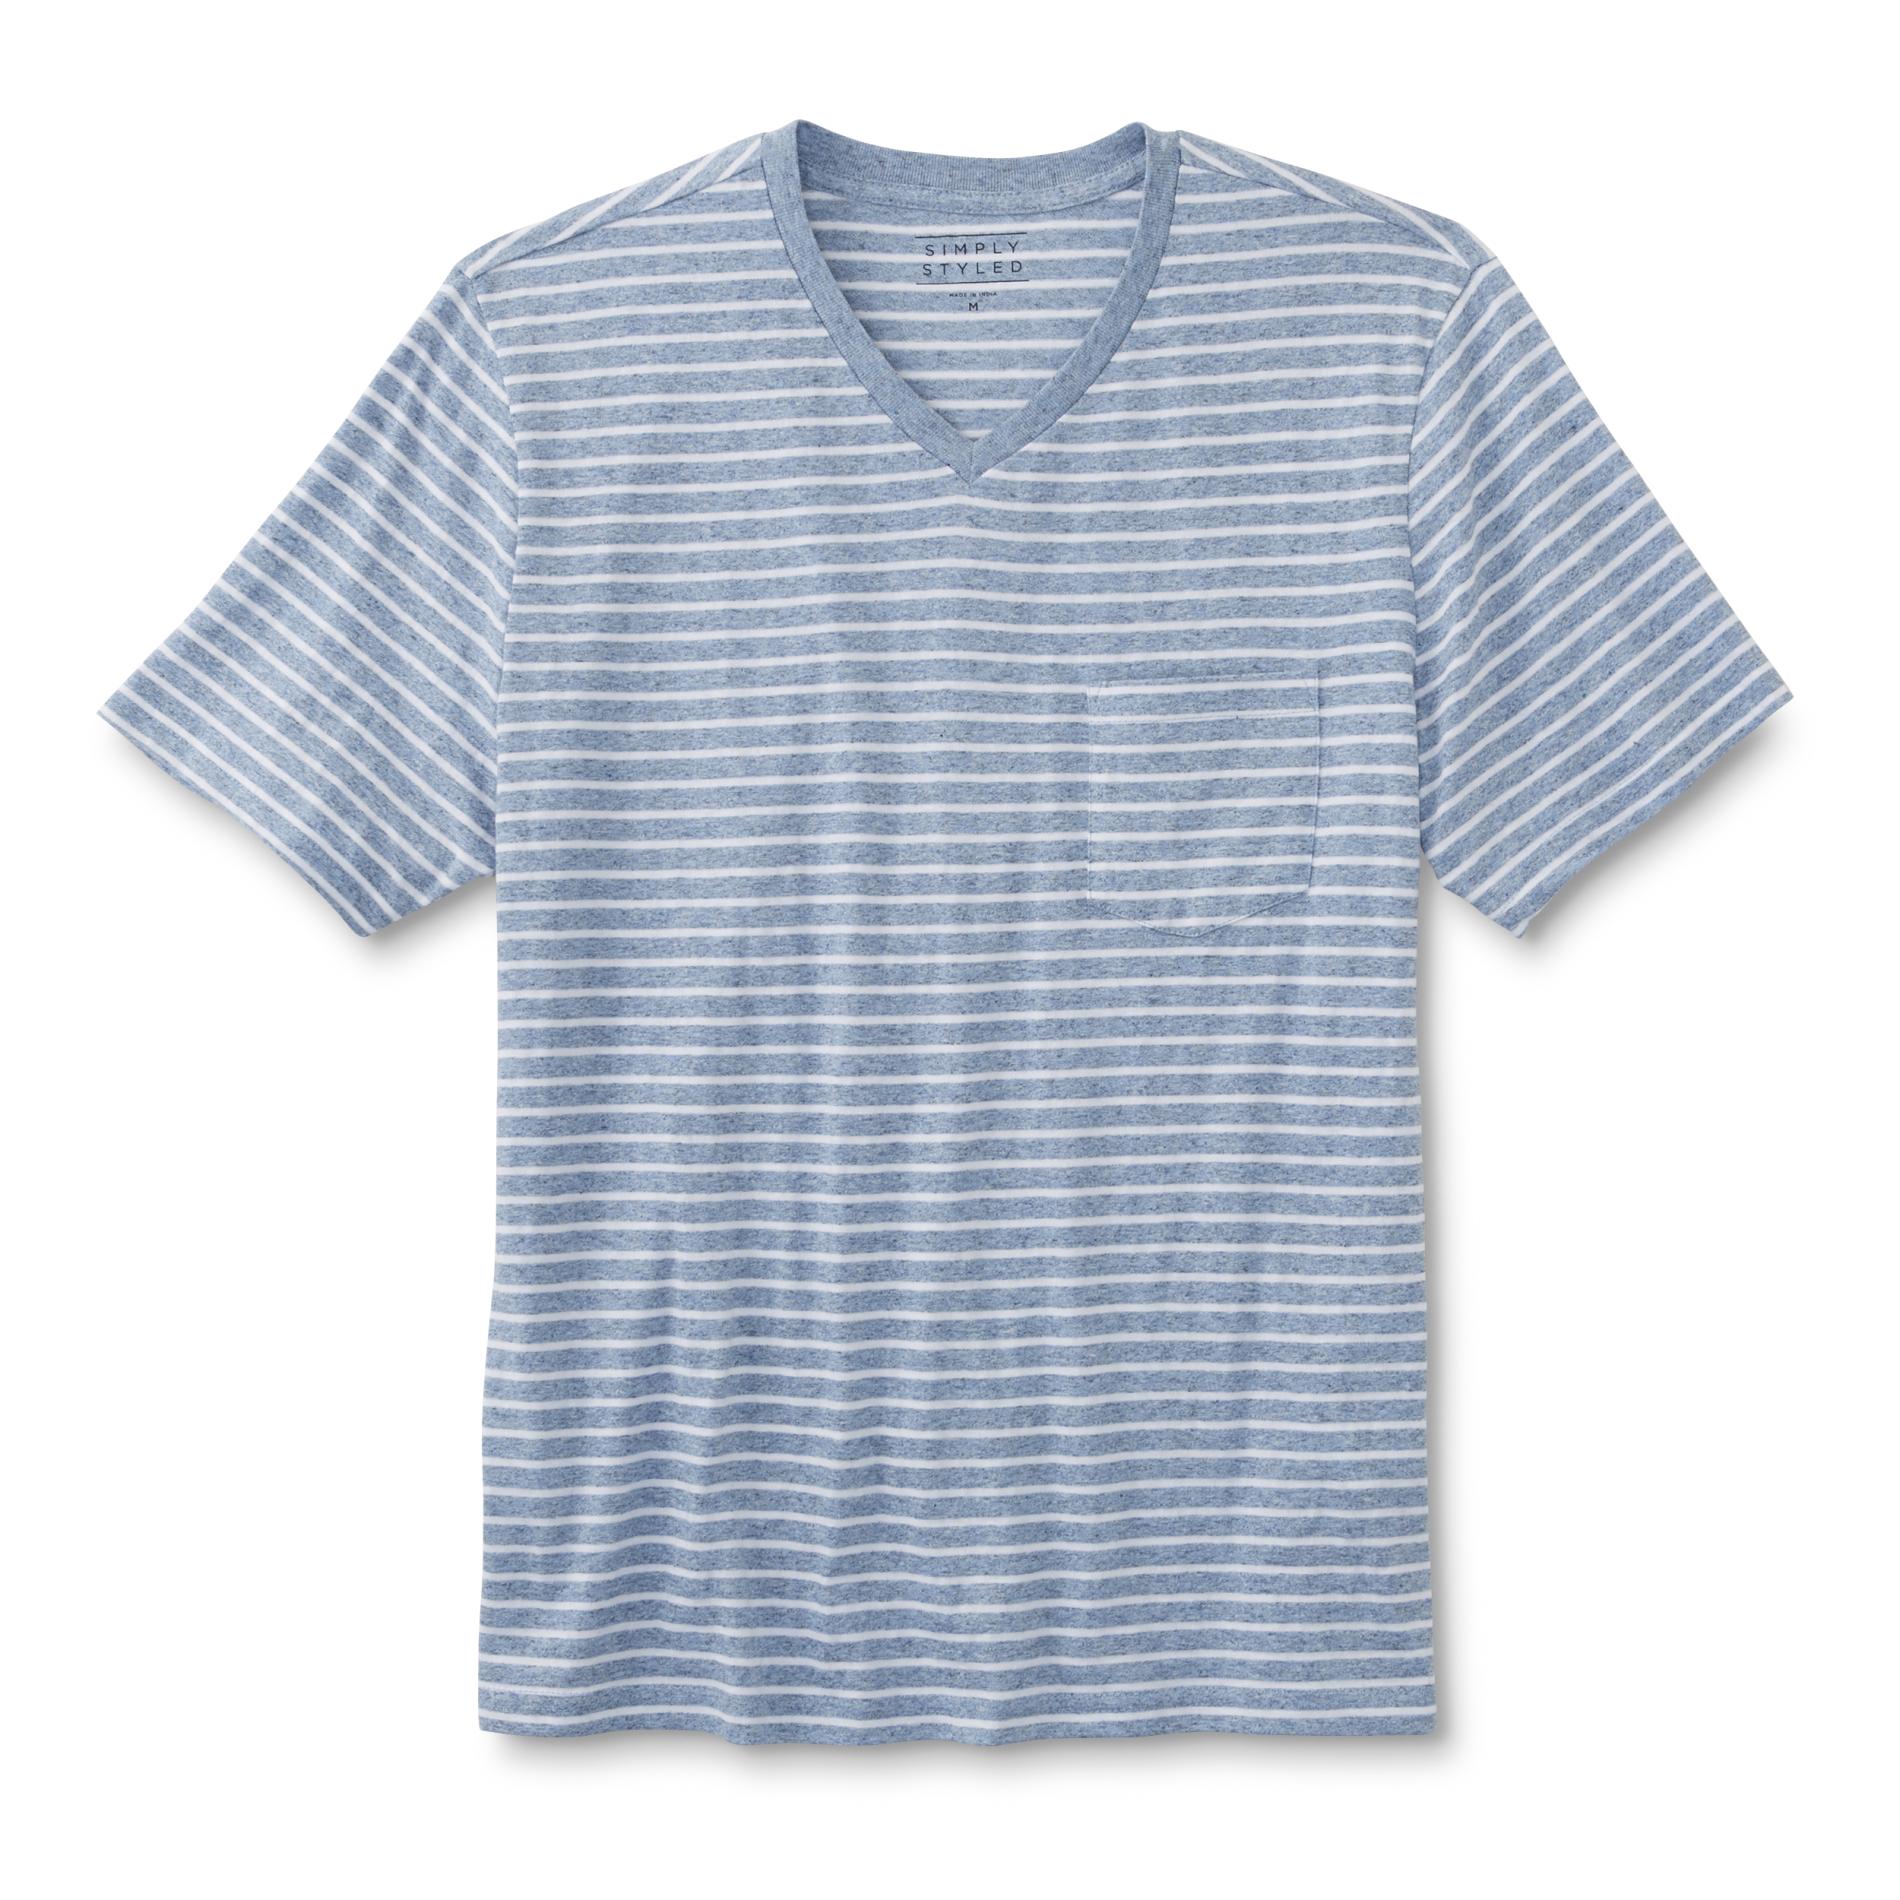 Simply Styled Men's Pocket T-Shirt - Striped